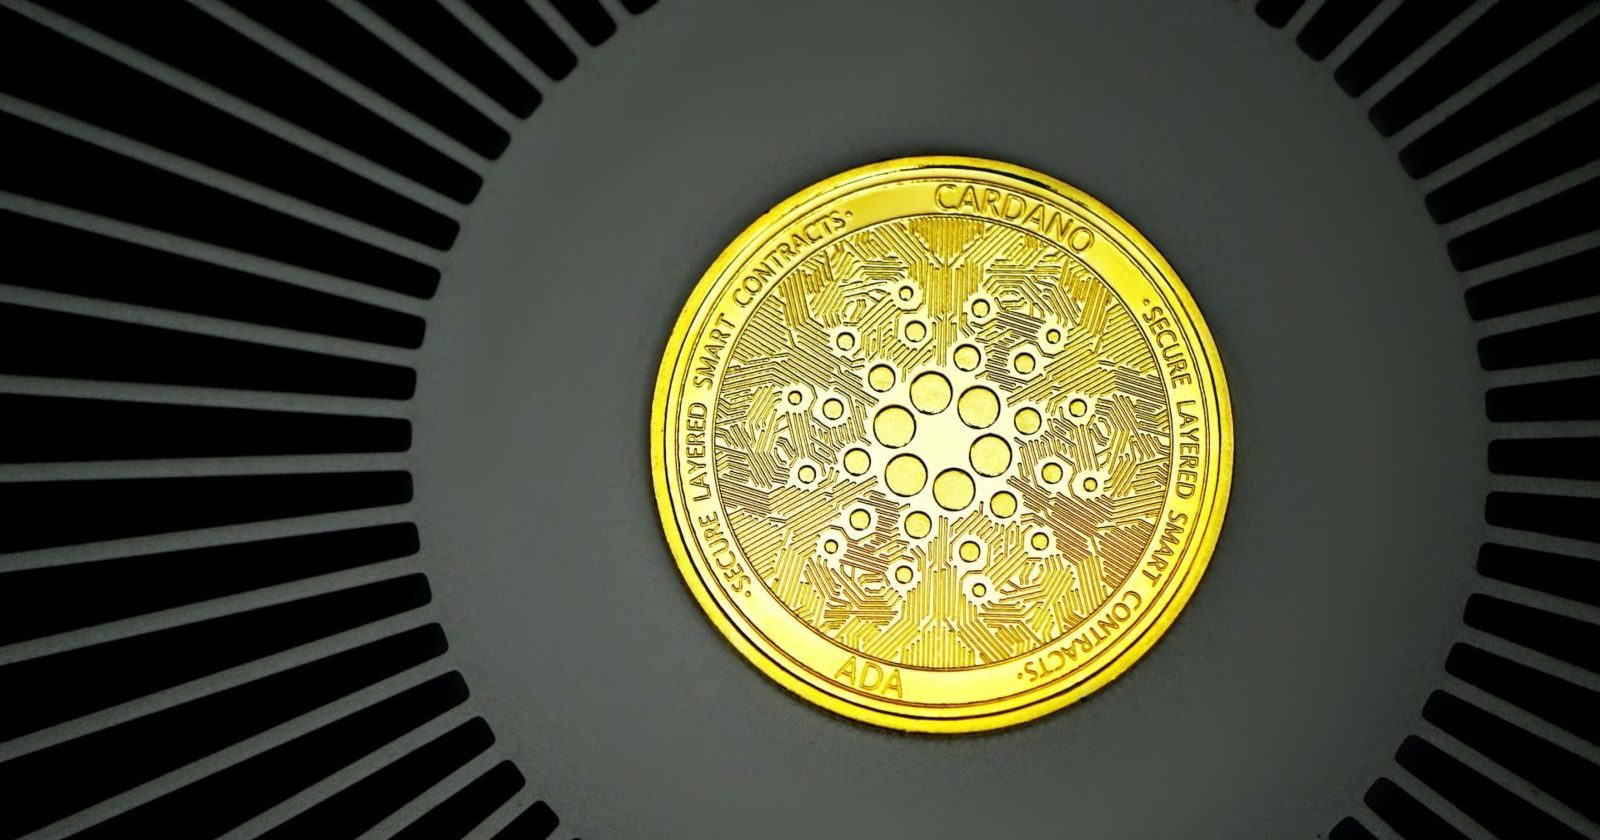 Cardano Wallets Grow With Over 50k Added Since Jan.1